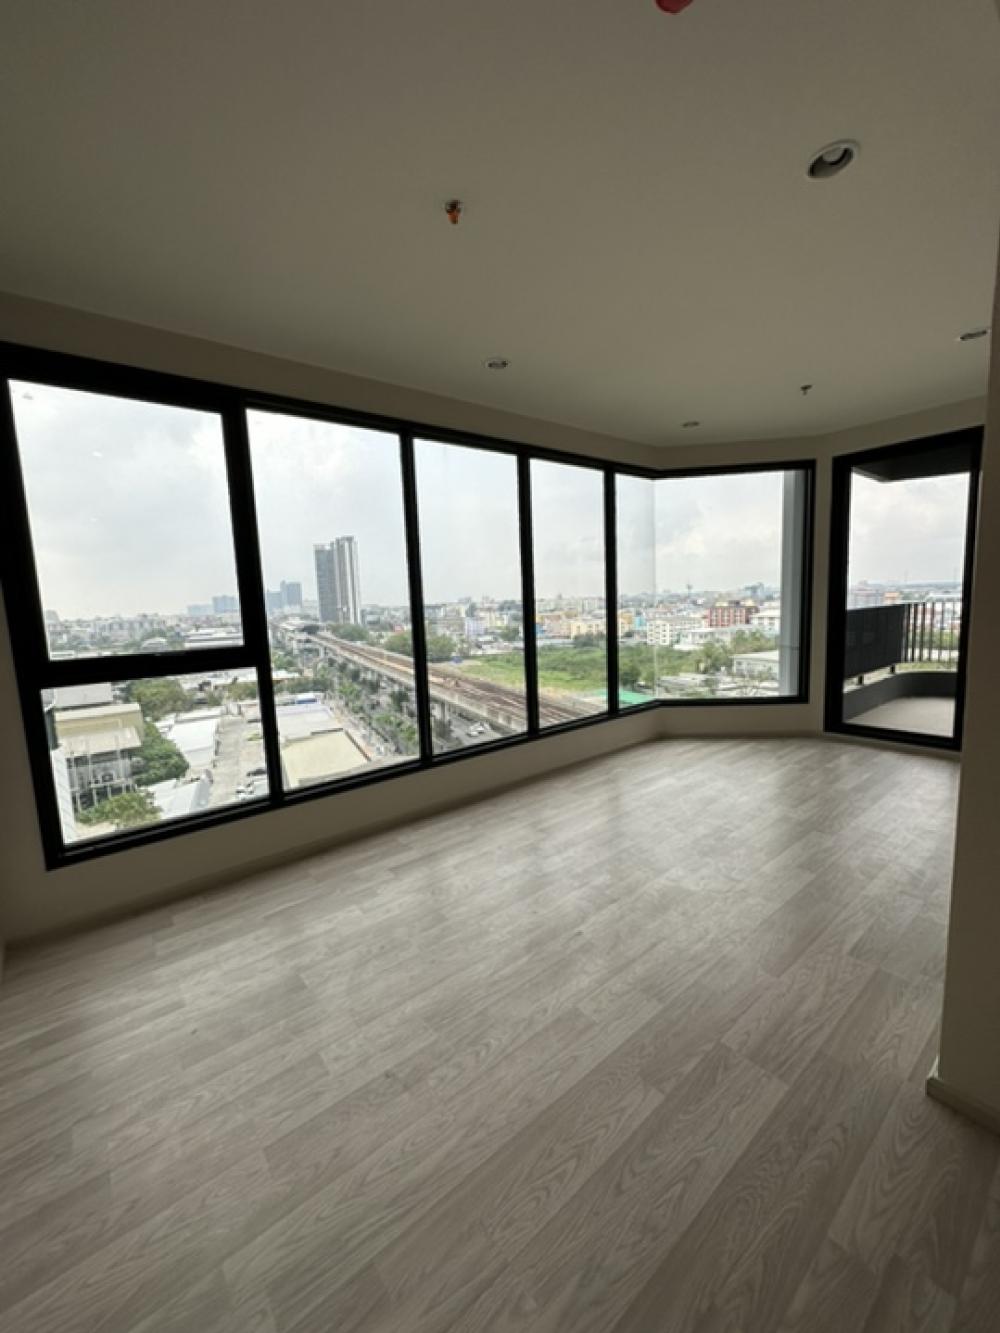 For SaleCondoBangna, Bearing, Lasalle : For sale IDEO MOBI Sukhumvit Eastpoint BTS Bangna 2 Bed 54.16 sq m, Building A, curved glass, price 6,190,000 baht, free common fees for 5 years.